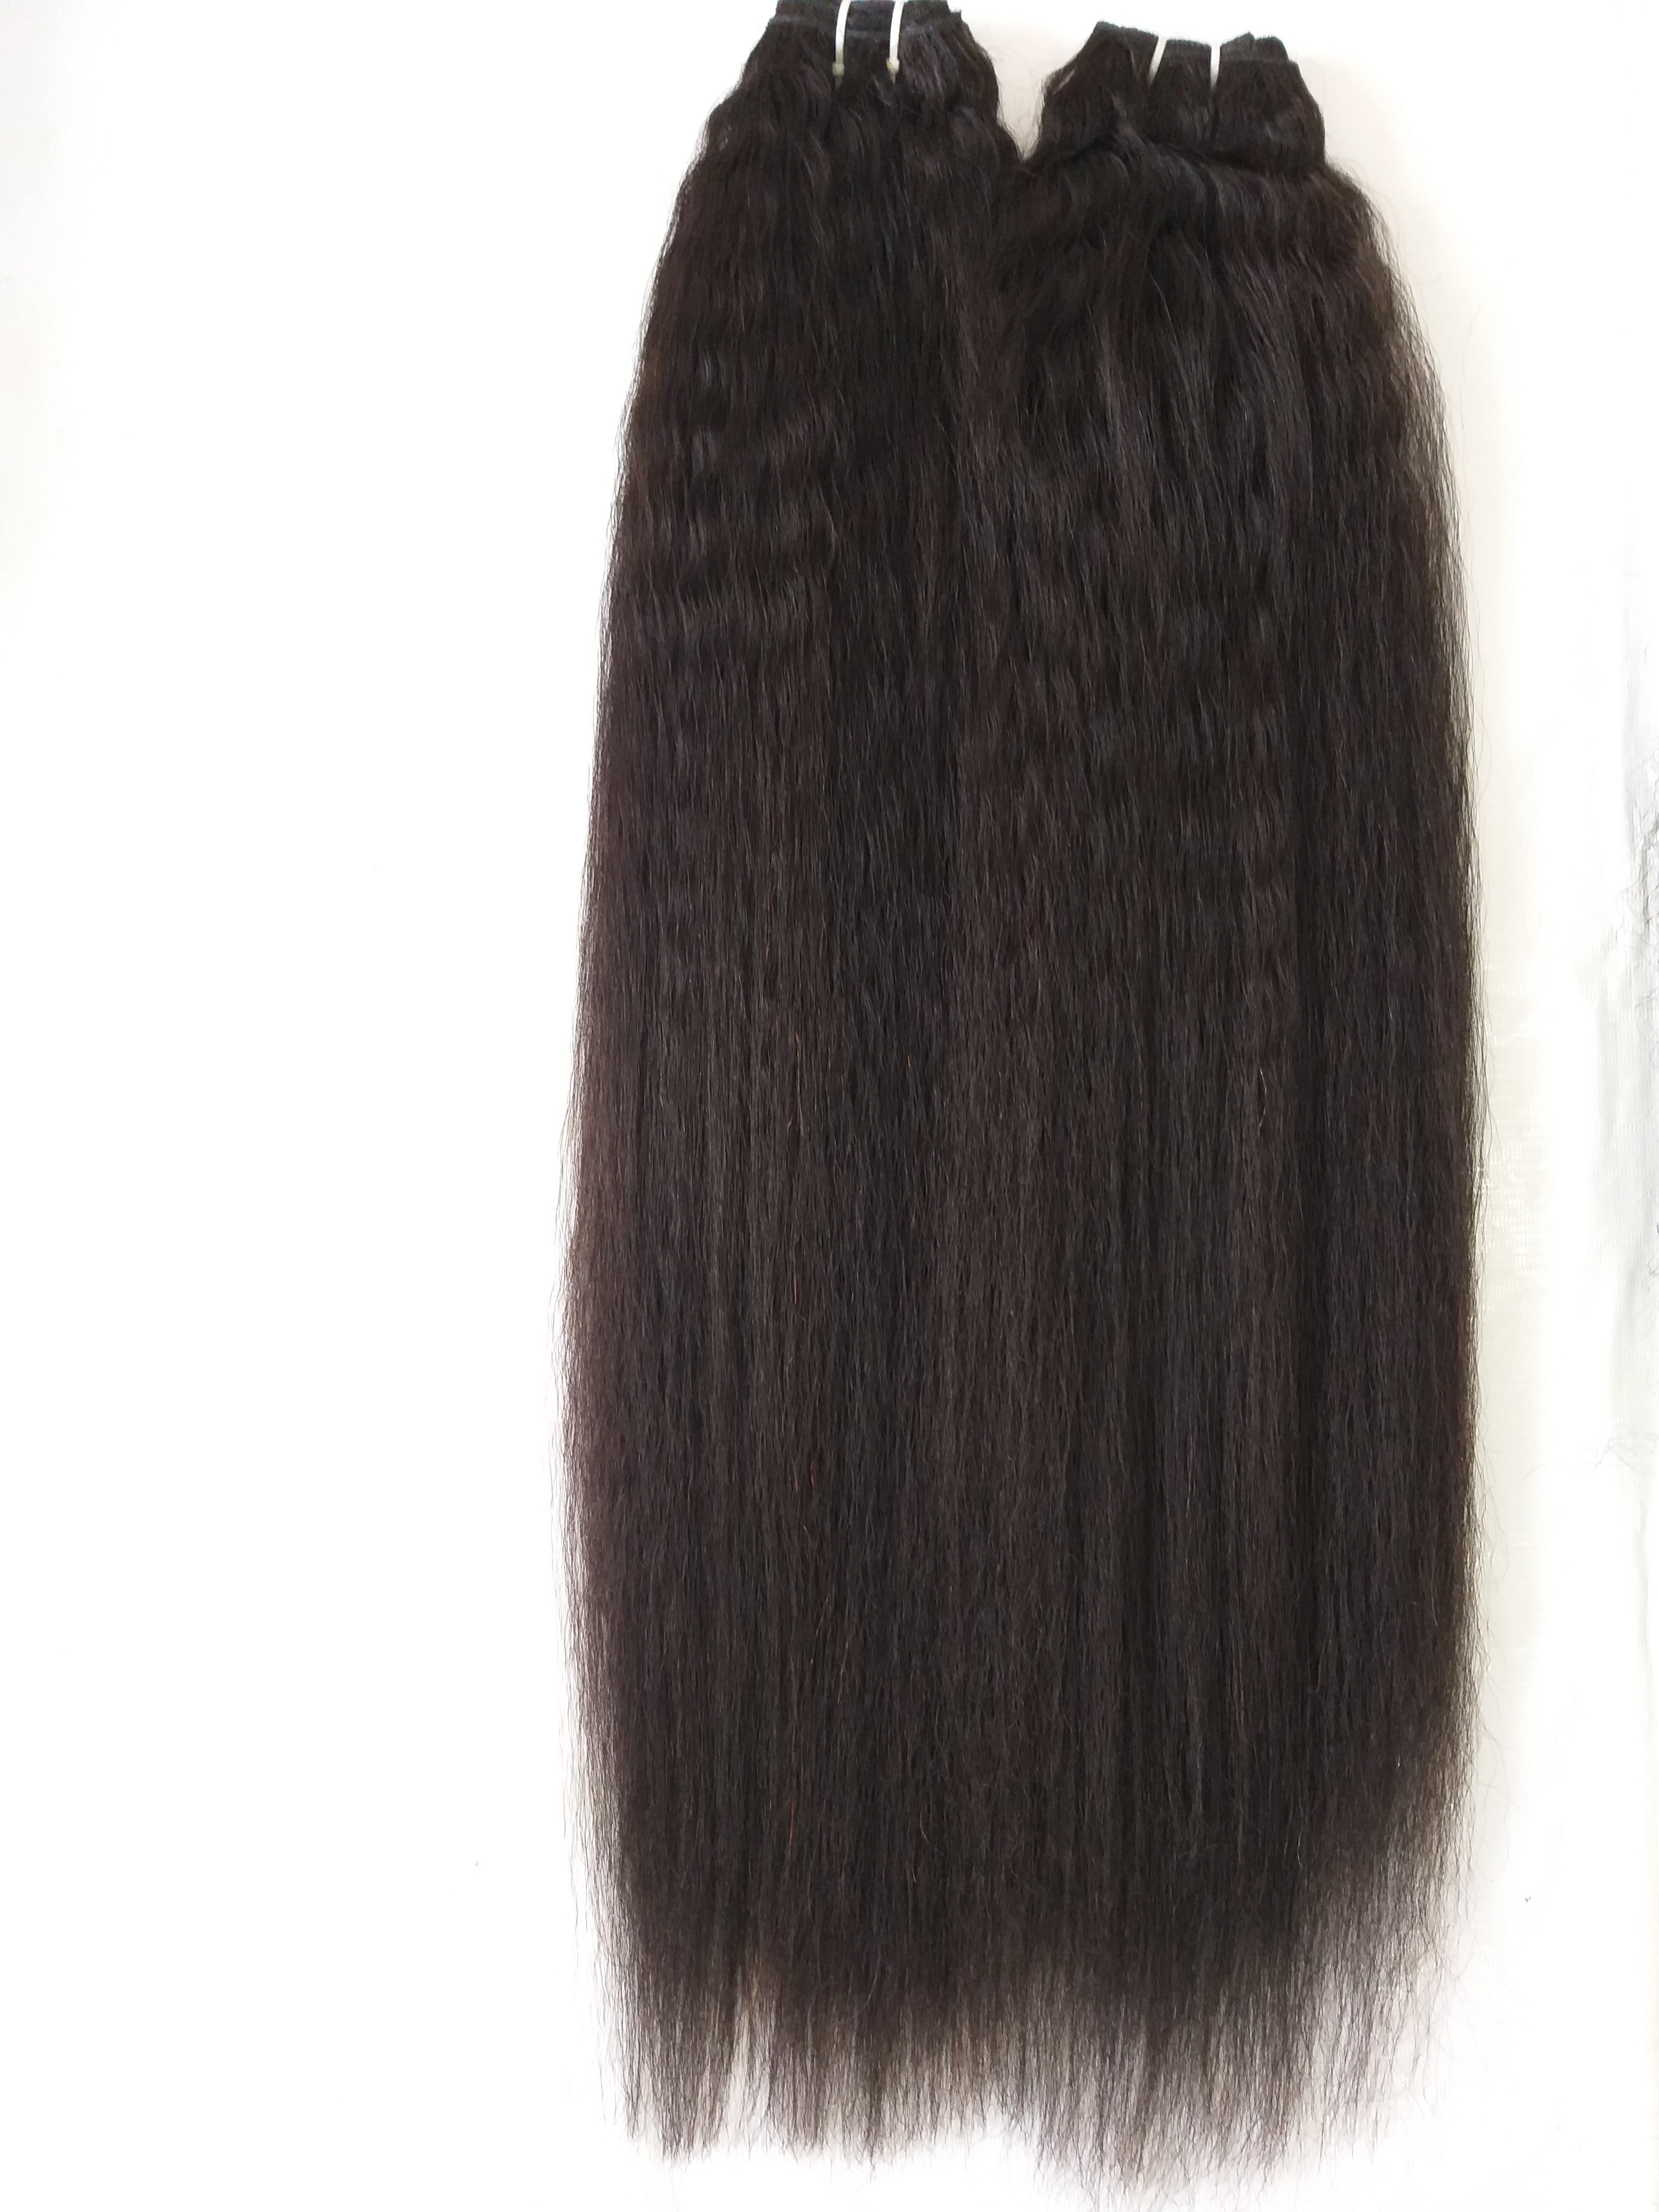 Natural Straight Hair Extensions Tangles and Shedding Free